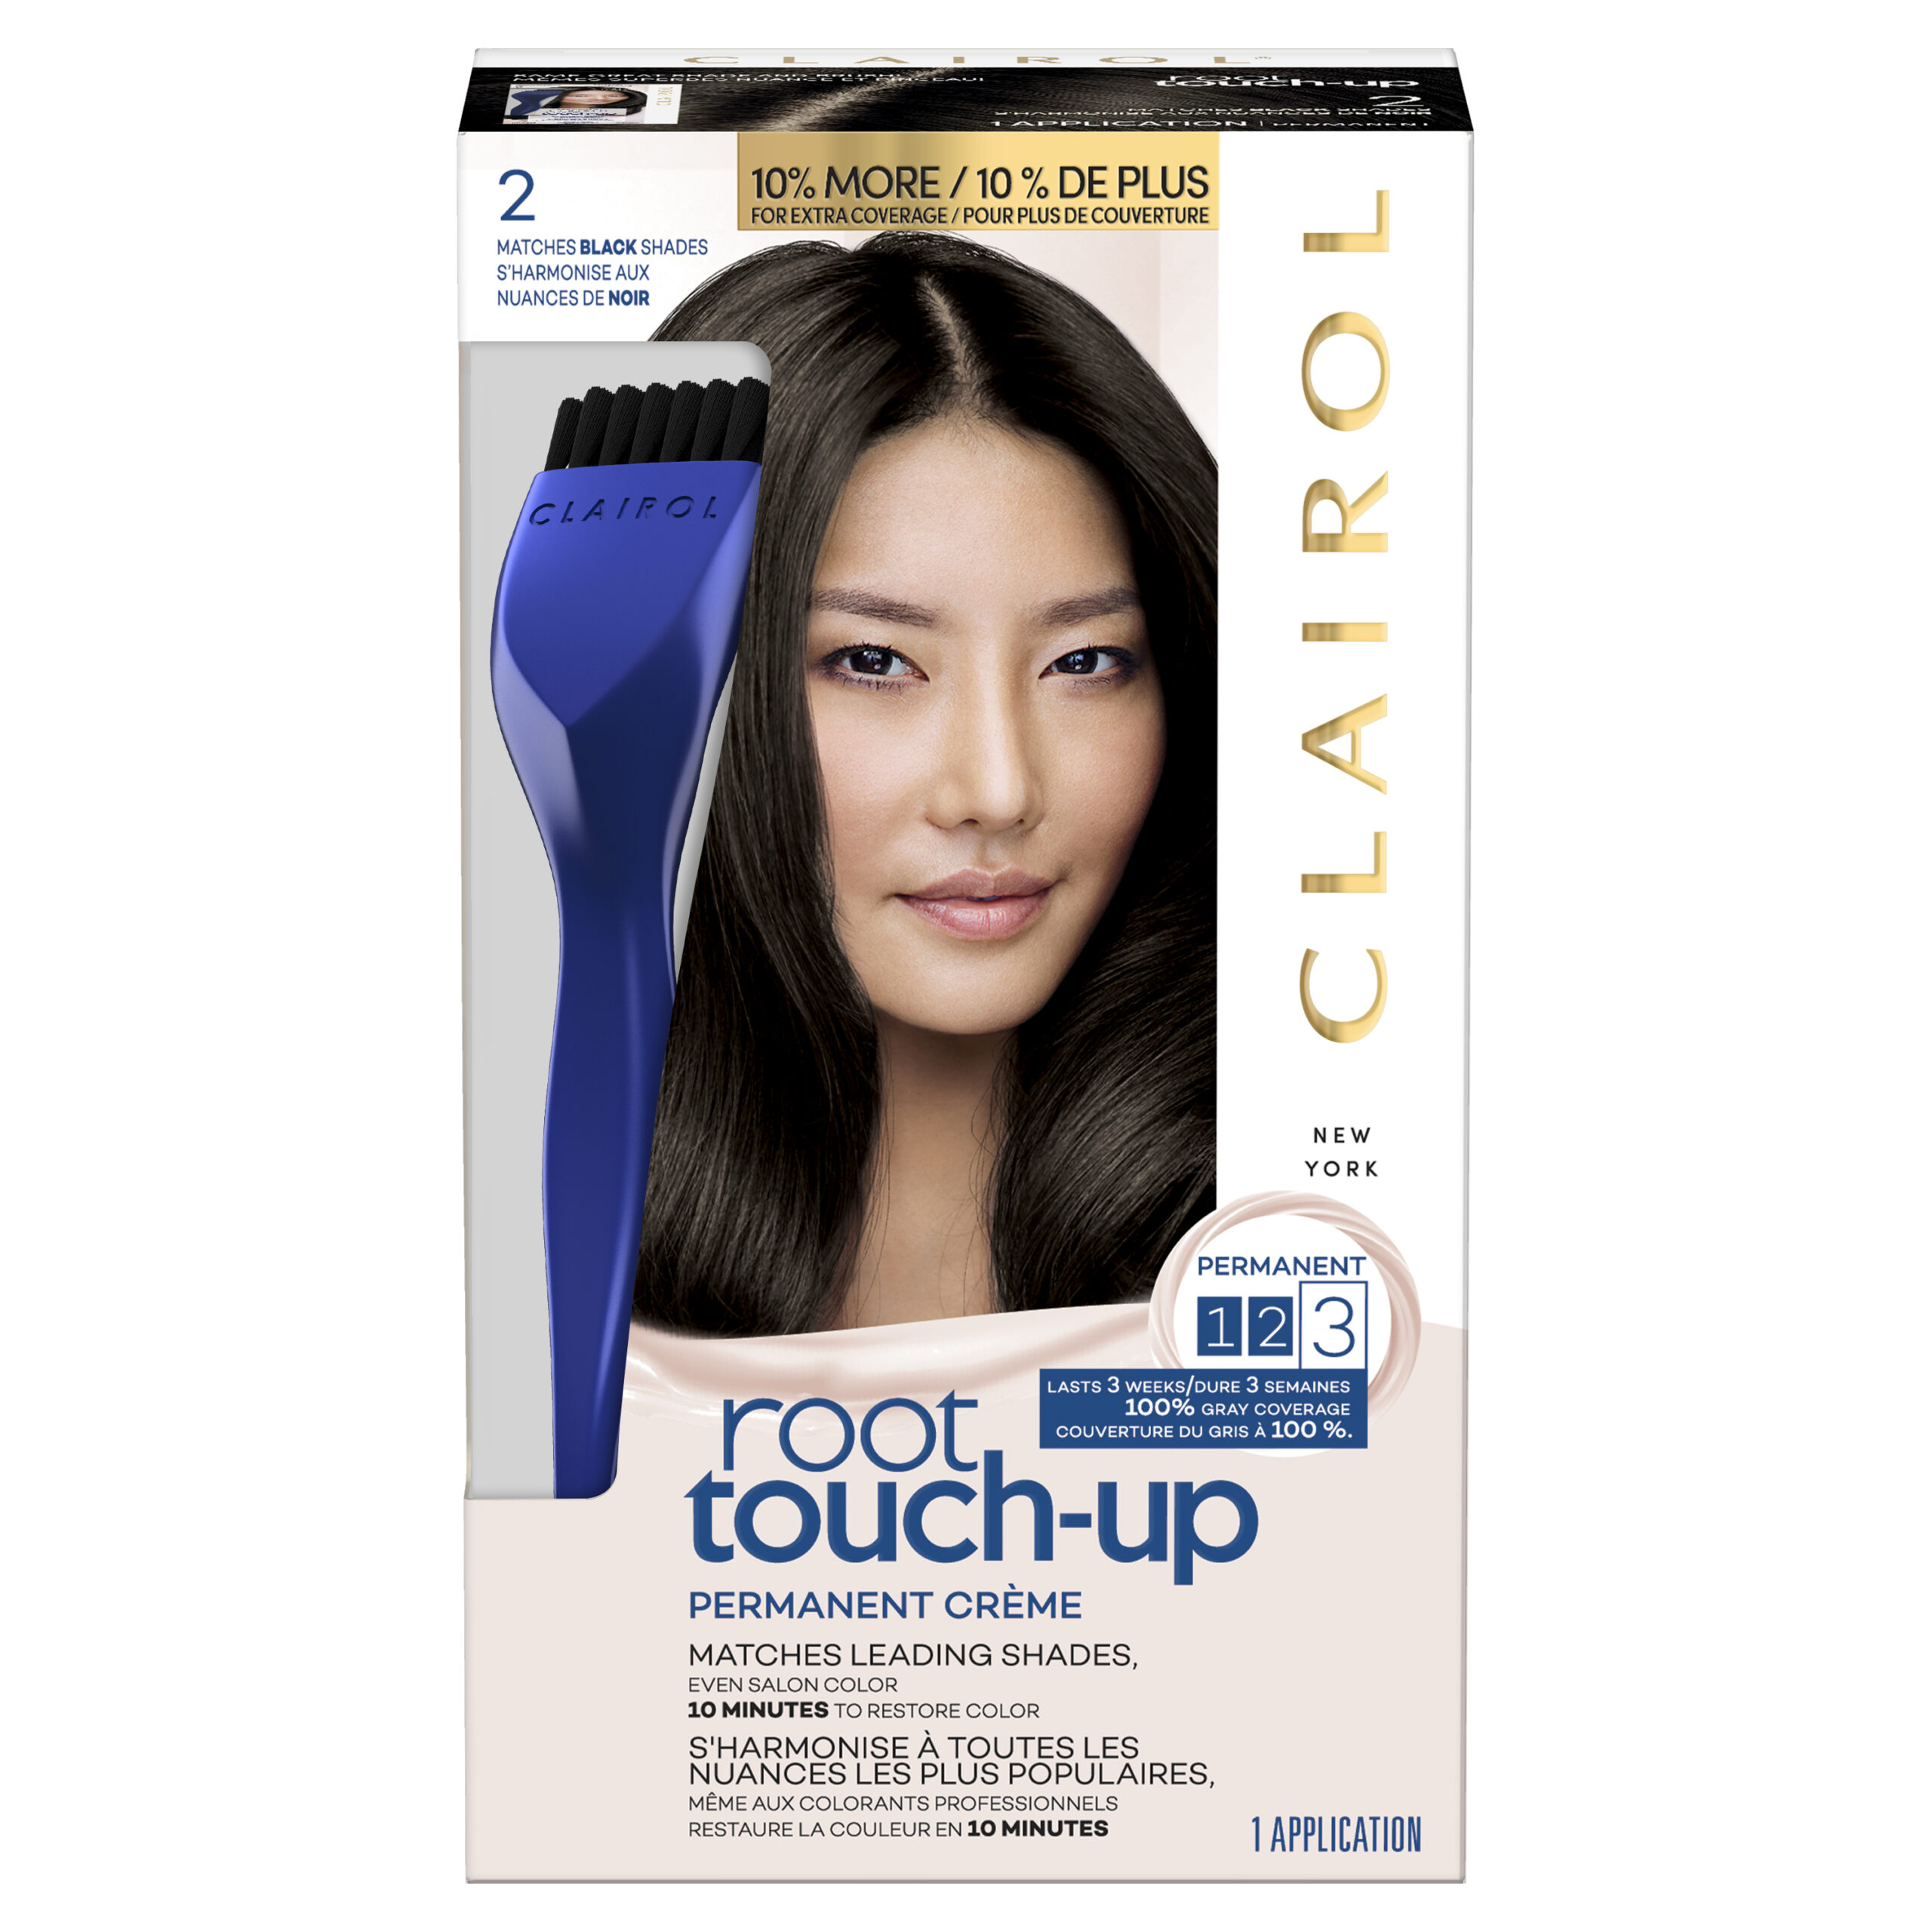 clairol gift guide